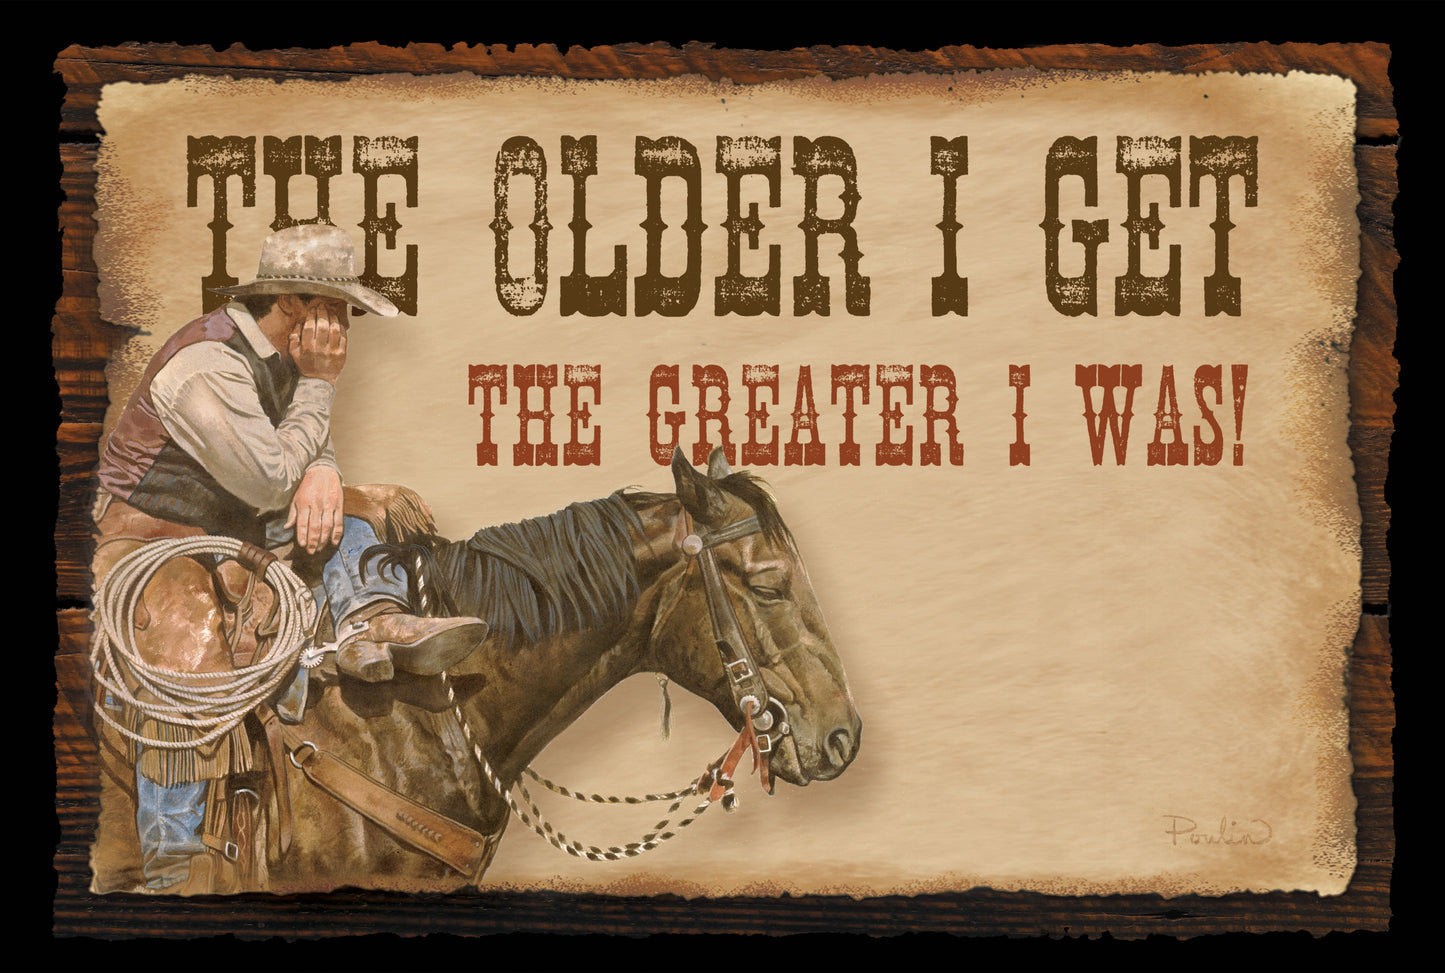 The Older I Get the Greater I Was - 8" x 12" Wood Sign